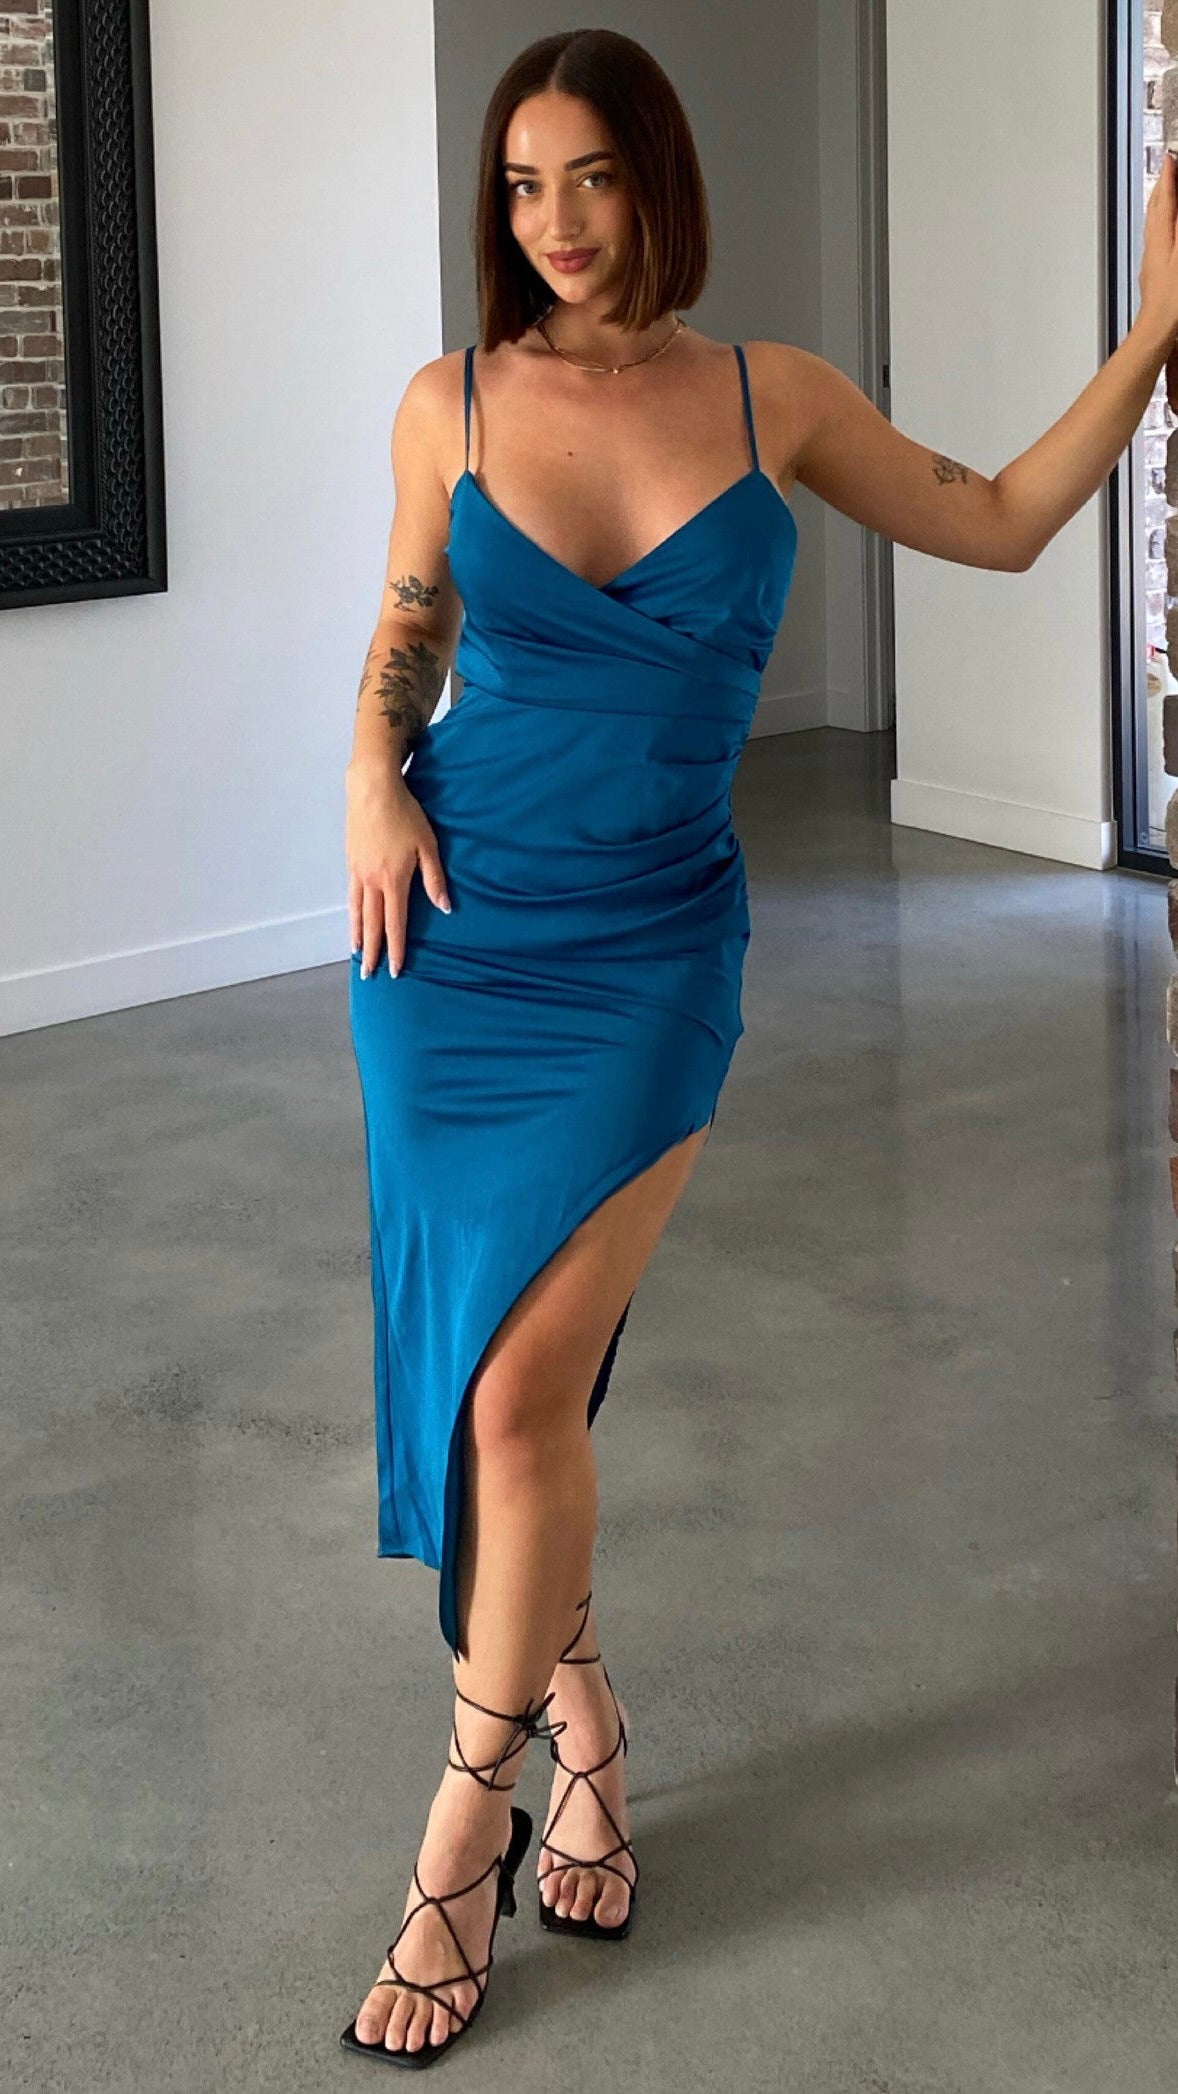 Haidee Dress: 
This satin feel cocktail dress is the perfect addition to your next girls night or cocktail function

Zip up back
Adjustable straps
Choose size according to your bo - Ciao Bella Dresses 